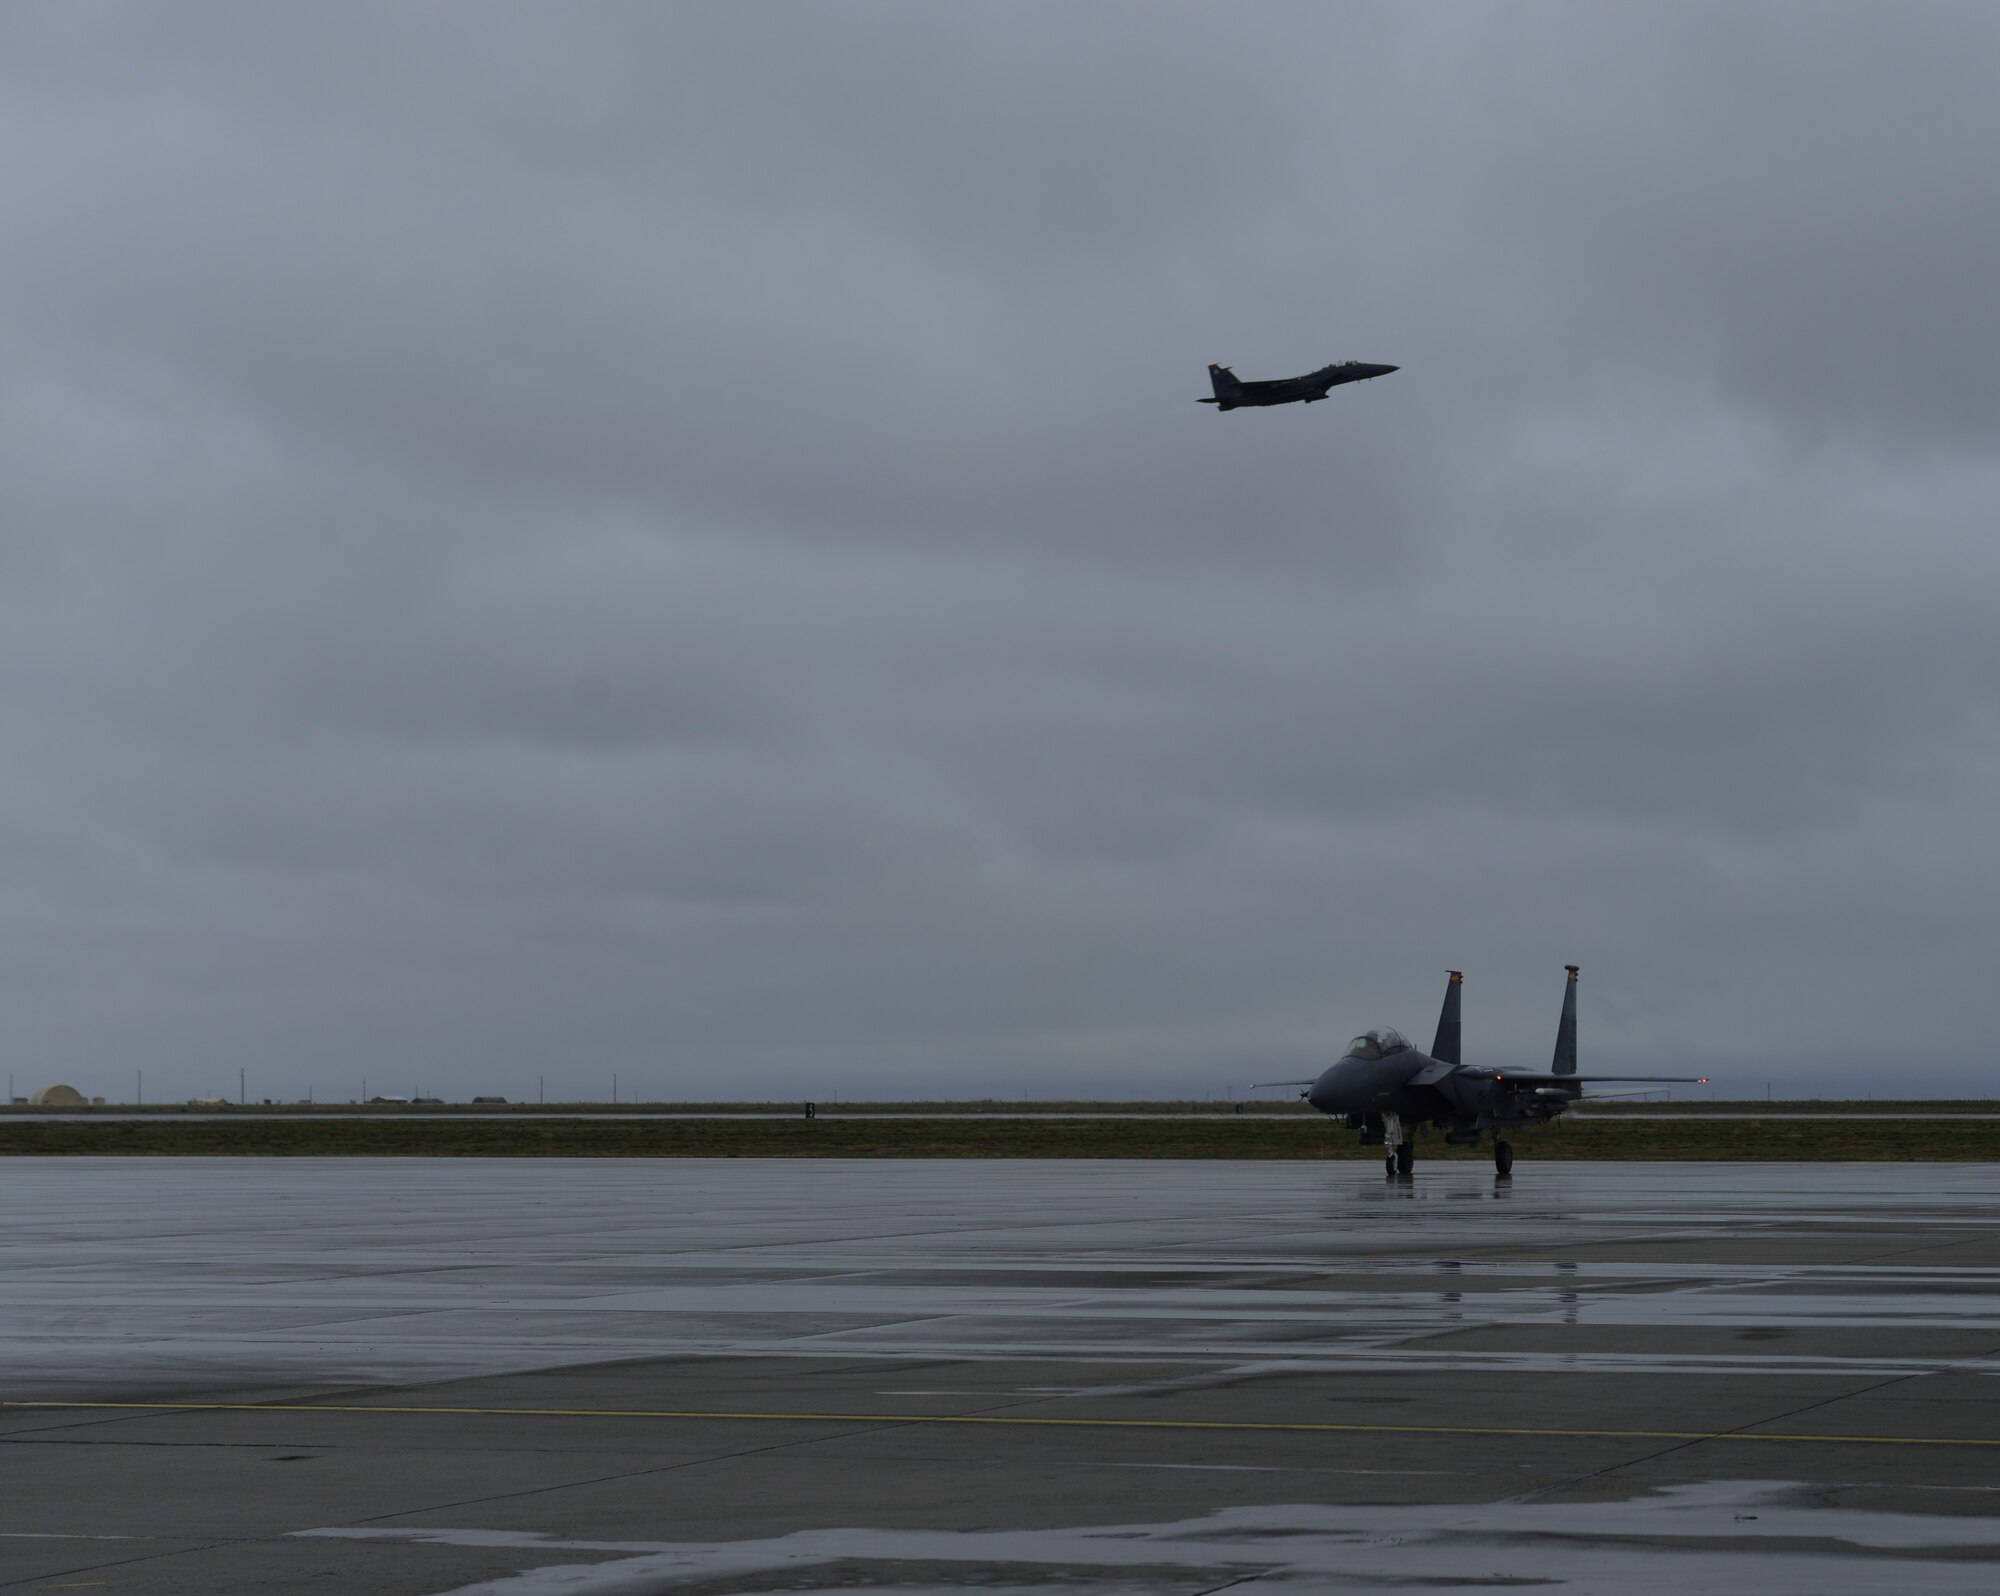 A F-15E Strike Eagle, assigned to the 389th Fighter Squadron, taxis in to park after a mission while another F-15E Strike Eagle, assigned to the 391st FS, takes off behind it March 10, 2014, at Mountain Home Air Force Base, Idaho. Operations out of MHAFB will be increased throughout the week of March 10-14 due to the combat exercise Gunighter Flag. Gunfighter Flag is an excellent opportunity for aircrew members from multiple squadron to train and respond to multiple daily launches. (U.S. Air Force photo by Senior Airman Ben Sutton/Released)

